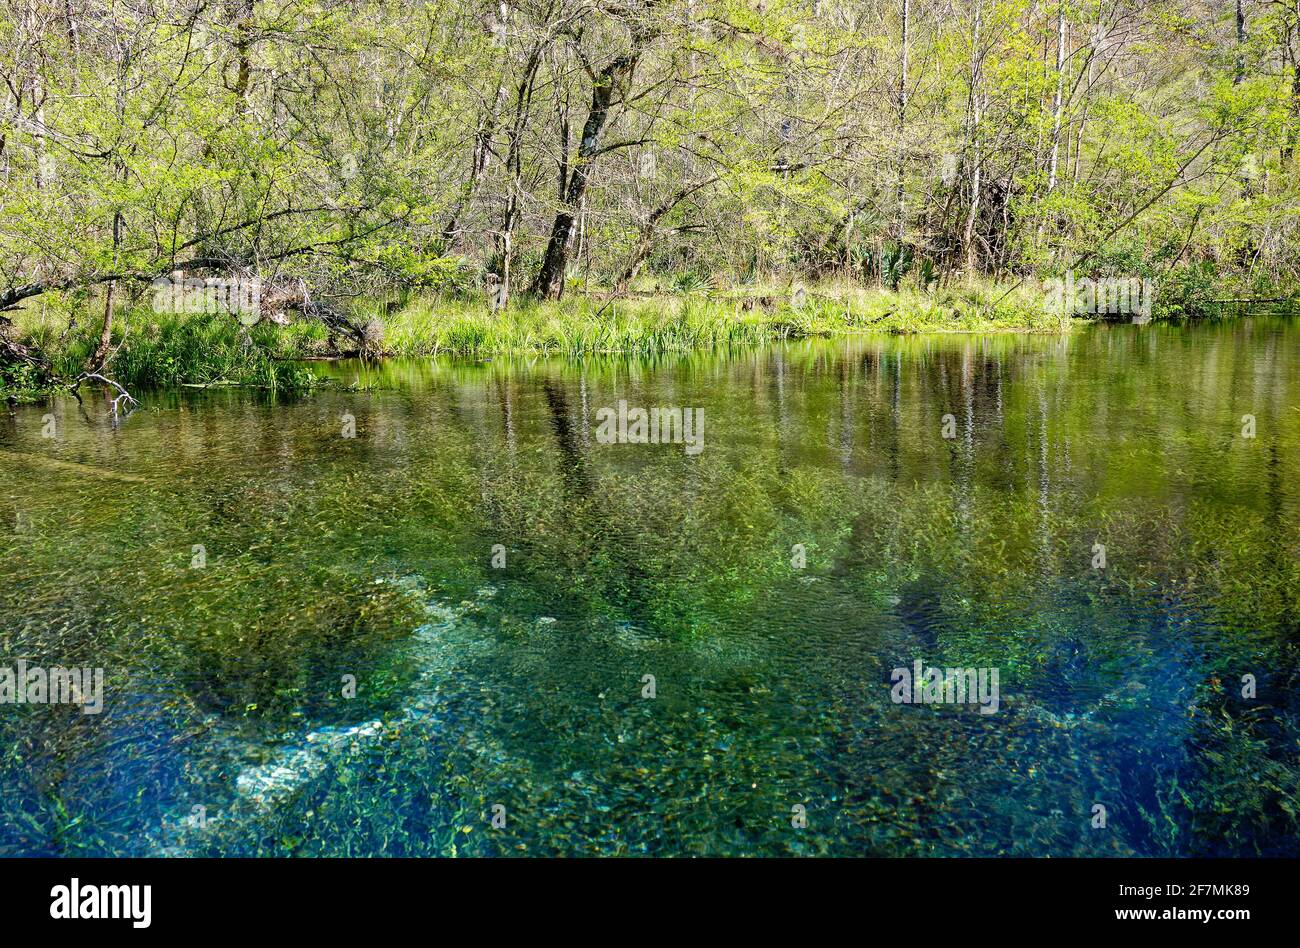 spring head, clear water, cool, nature, river, new spring growth, vegetation, trees, reflections, Ichetucknee Springs State Park, Florida, Fort White, Stock Photo